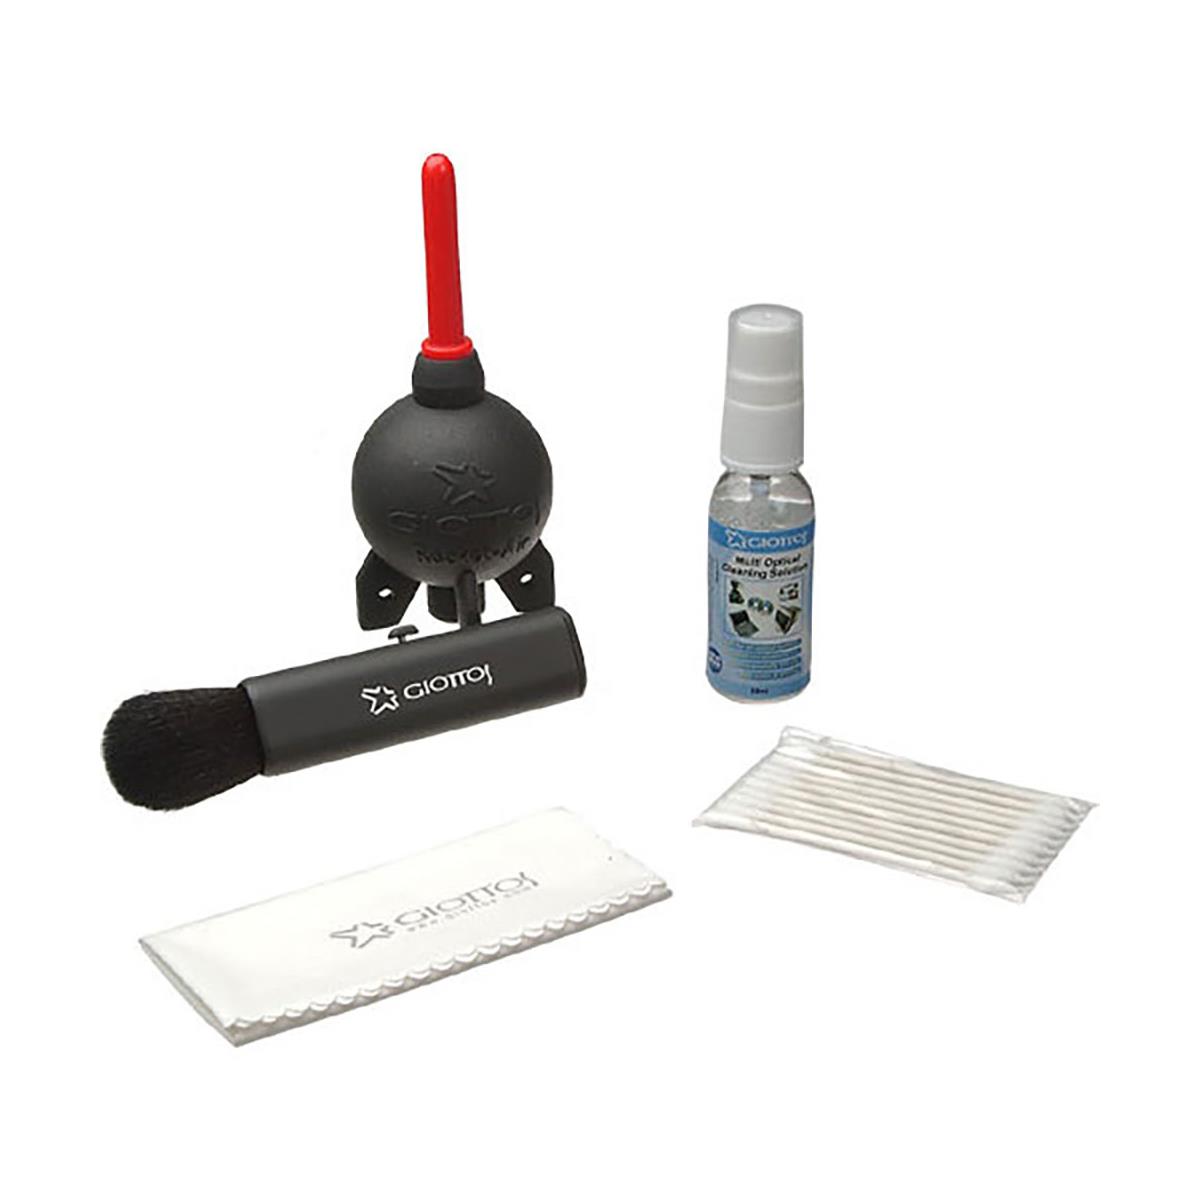 Photos - Camera Cleaning Equipment Giottos OOptical Cleaning Bundle with Rocket Air Blaster, Brush and Liquid 